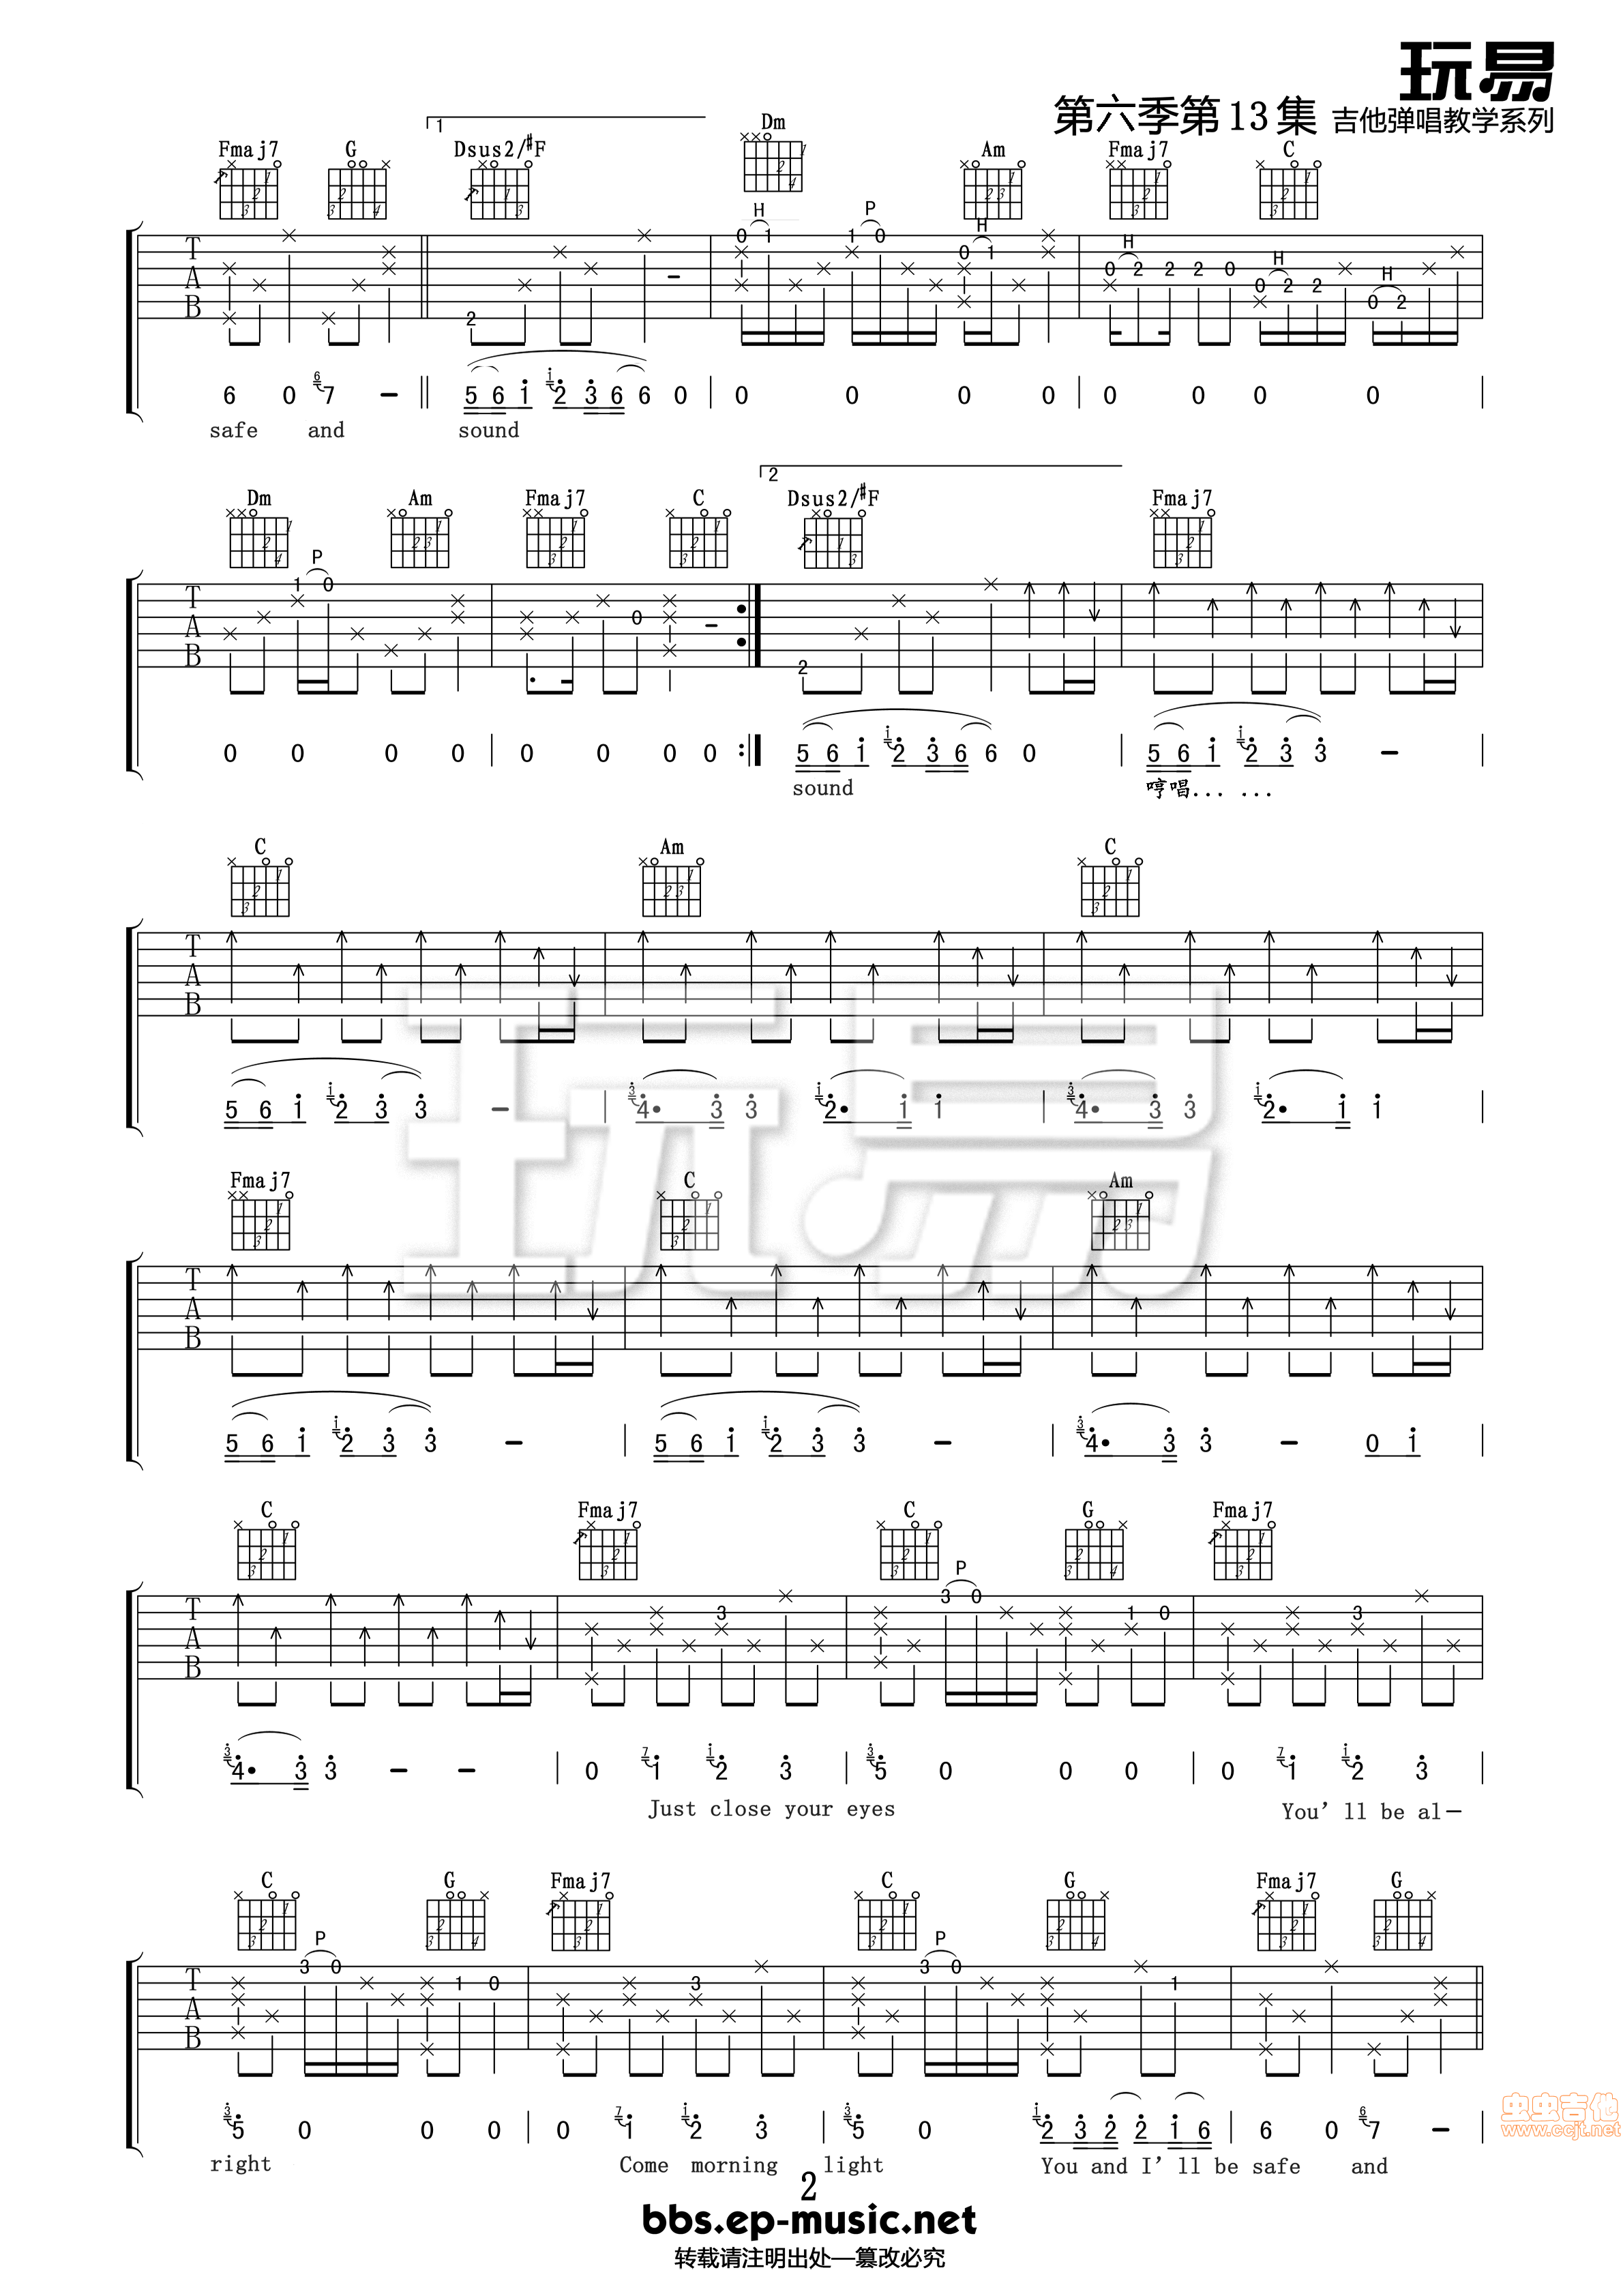 Safe And Sound by Taylor Swift Guitar Tabs Chords Solo Notes Sheet Music Free